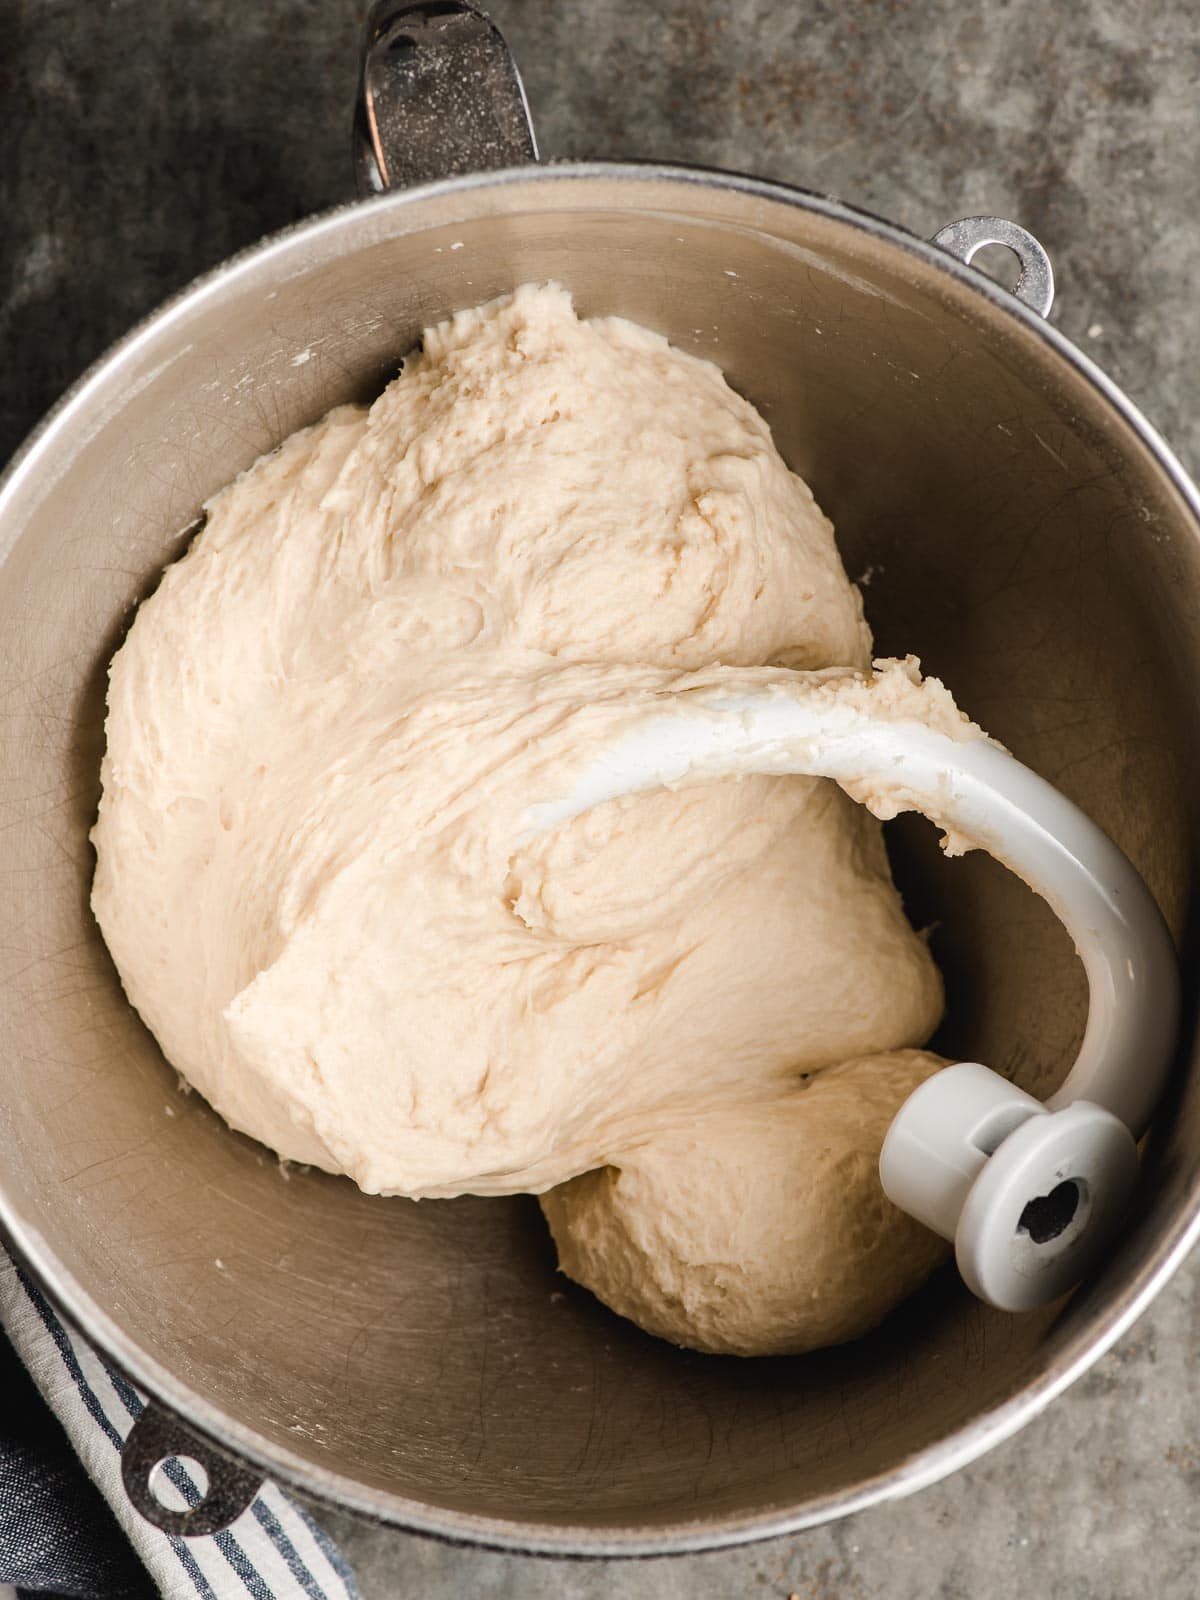 Dough hook in the bowl of an electric mixer with white bread dough.